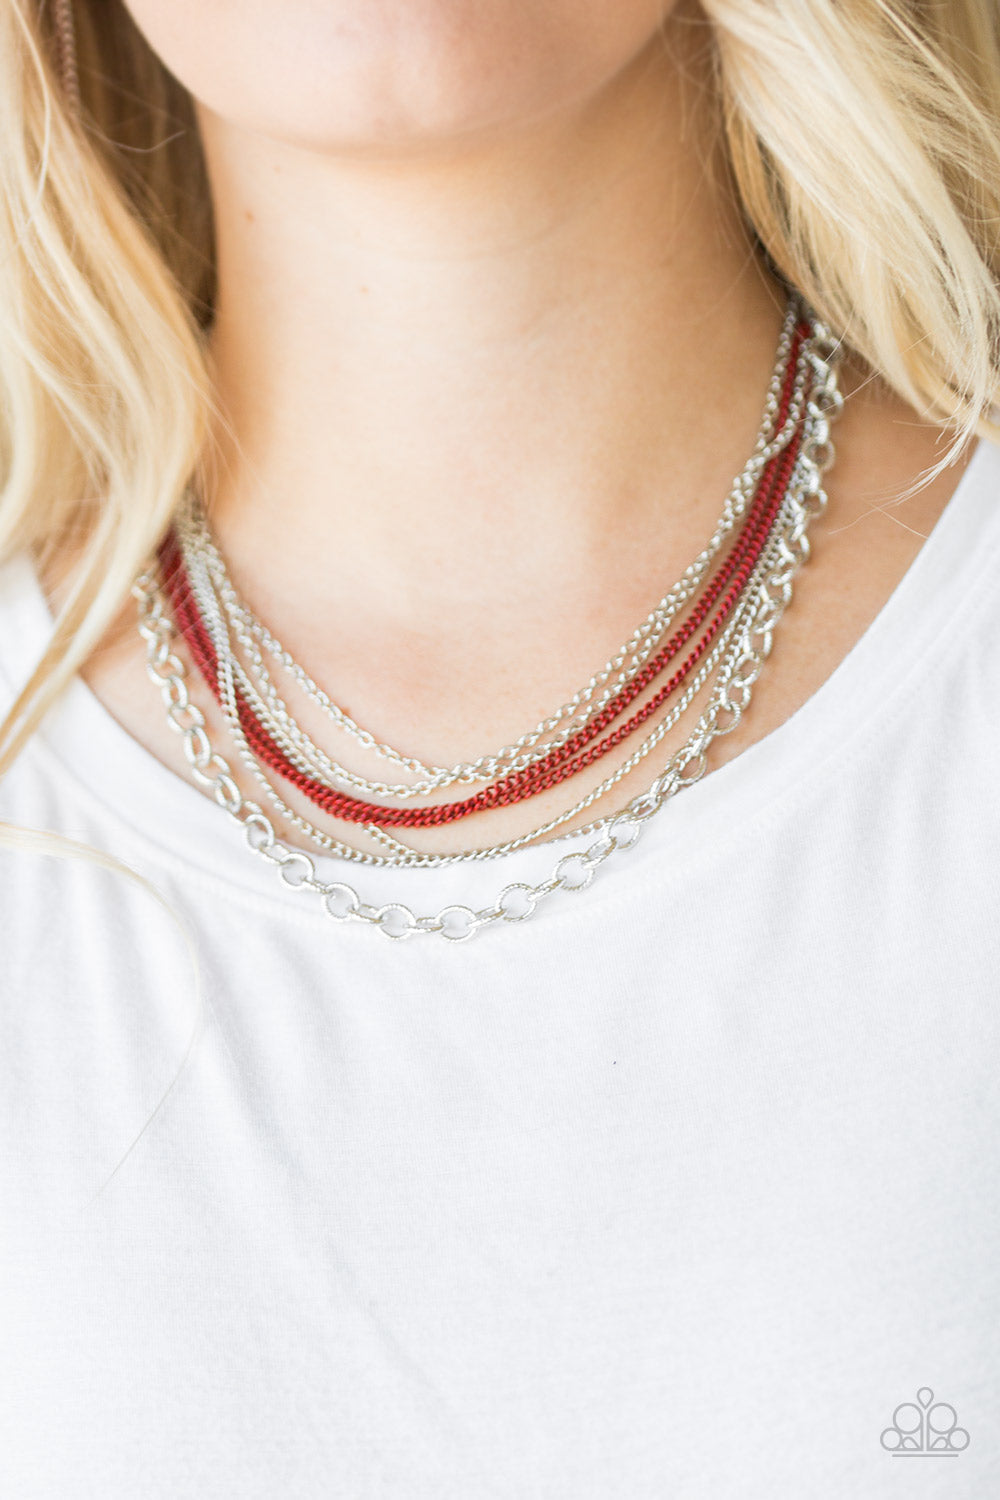 Paparazzi Intensely Industrial - Red - Silver Necklace and matching Earrings - $5 Jewelry With Ashley Swint